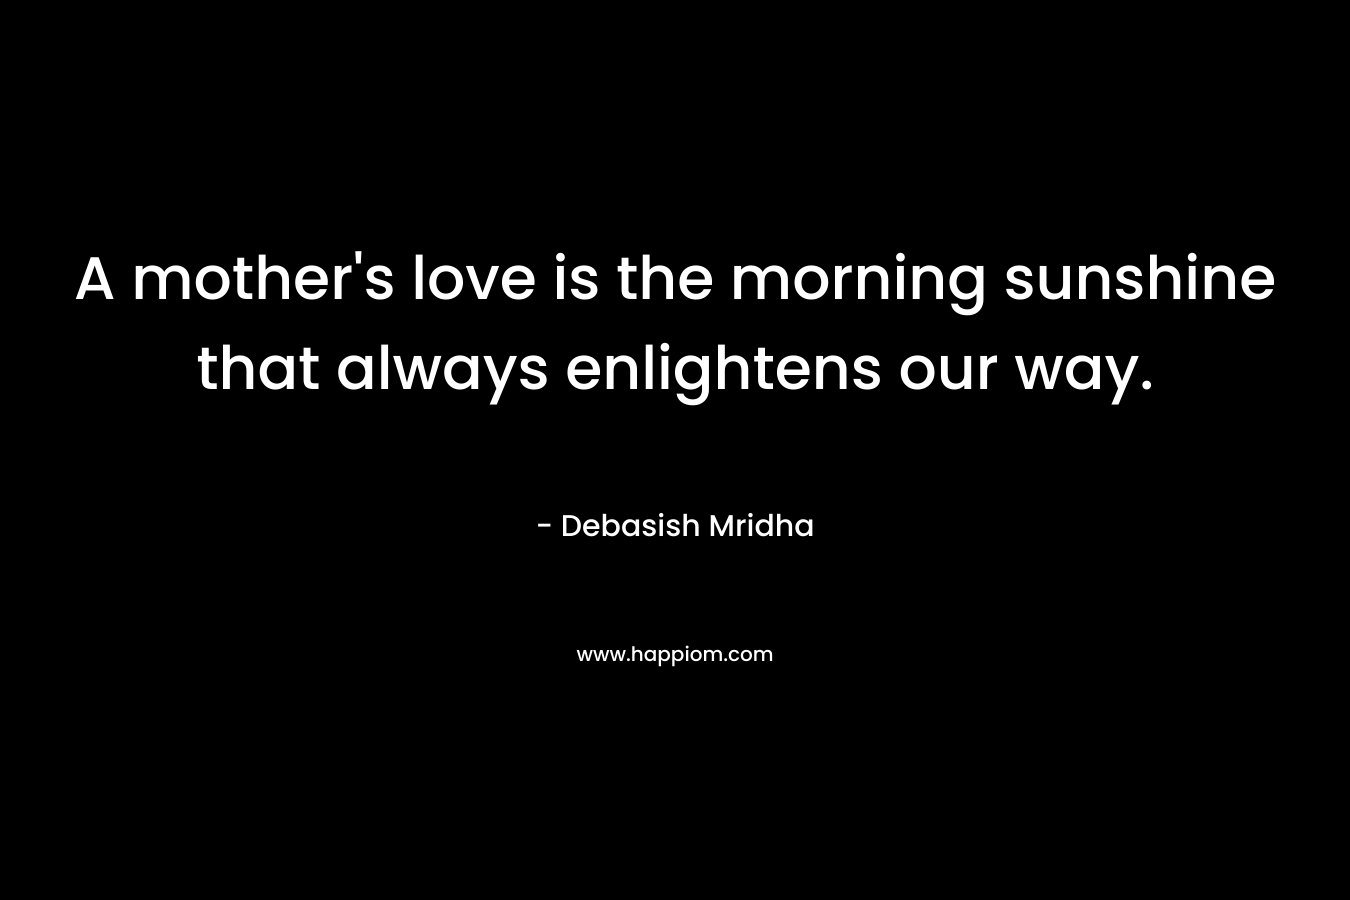 A mother’s love is the morning sunshine that always enlightens our way. – Debasish Mridha